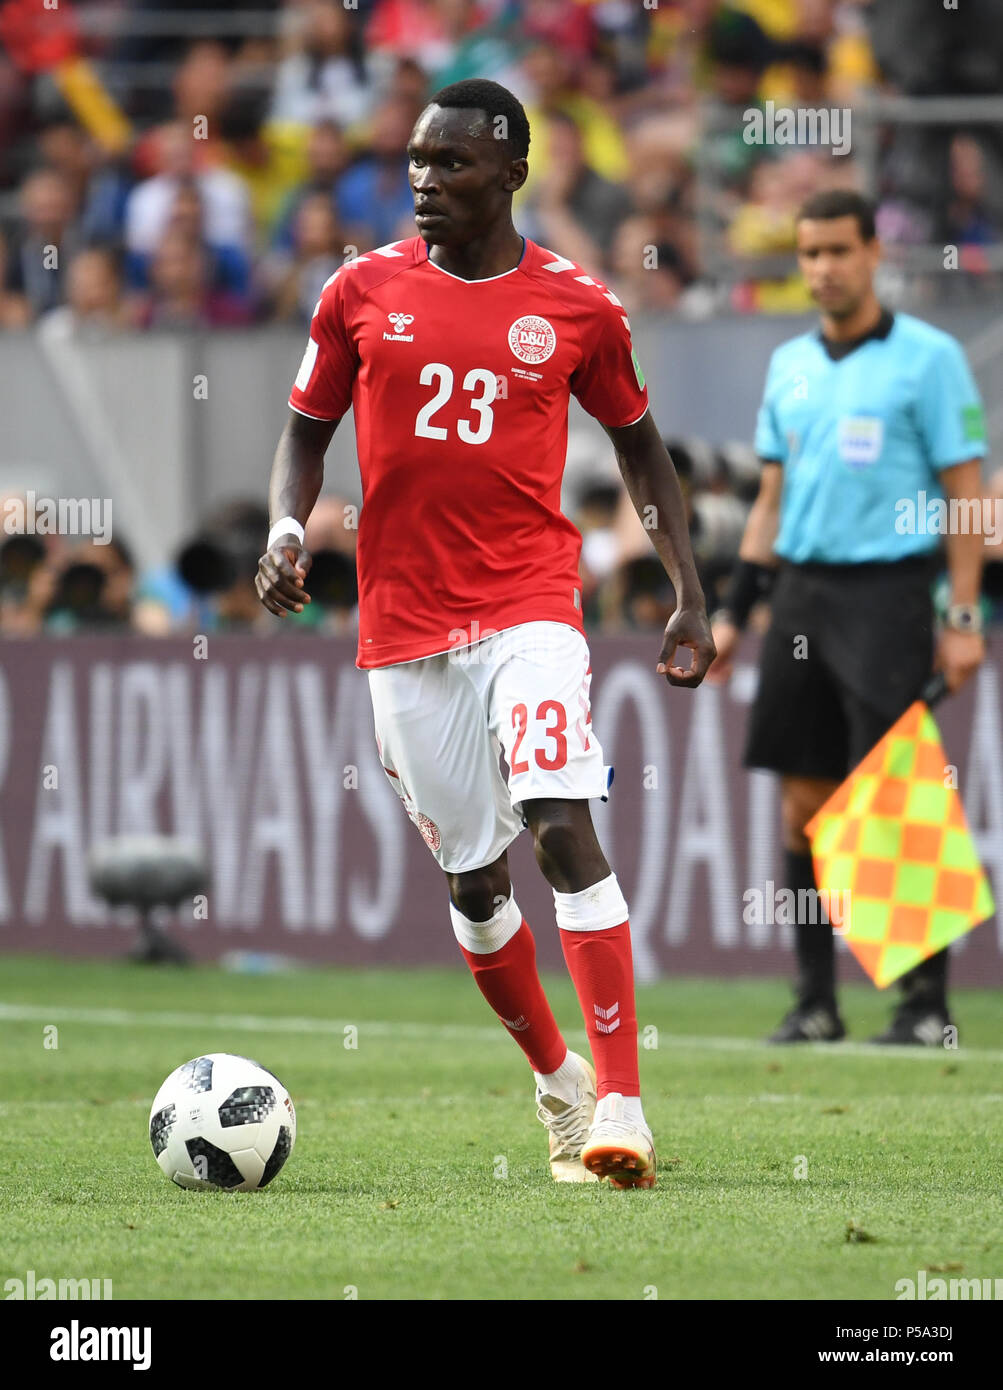 Moscow, Russia. 26th June, 2018. Soccer, World Cup 2018, Preliminary round, Group C, 3rd game day, Denmark vs. France at the Luschniki Stadium. Denmark's Pione Sisto in action. Credit: Federico Gambarini/dpa/Alamy Live News Stock Photo